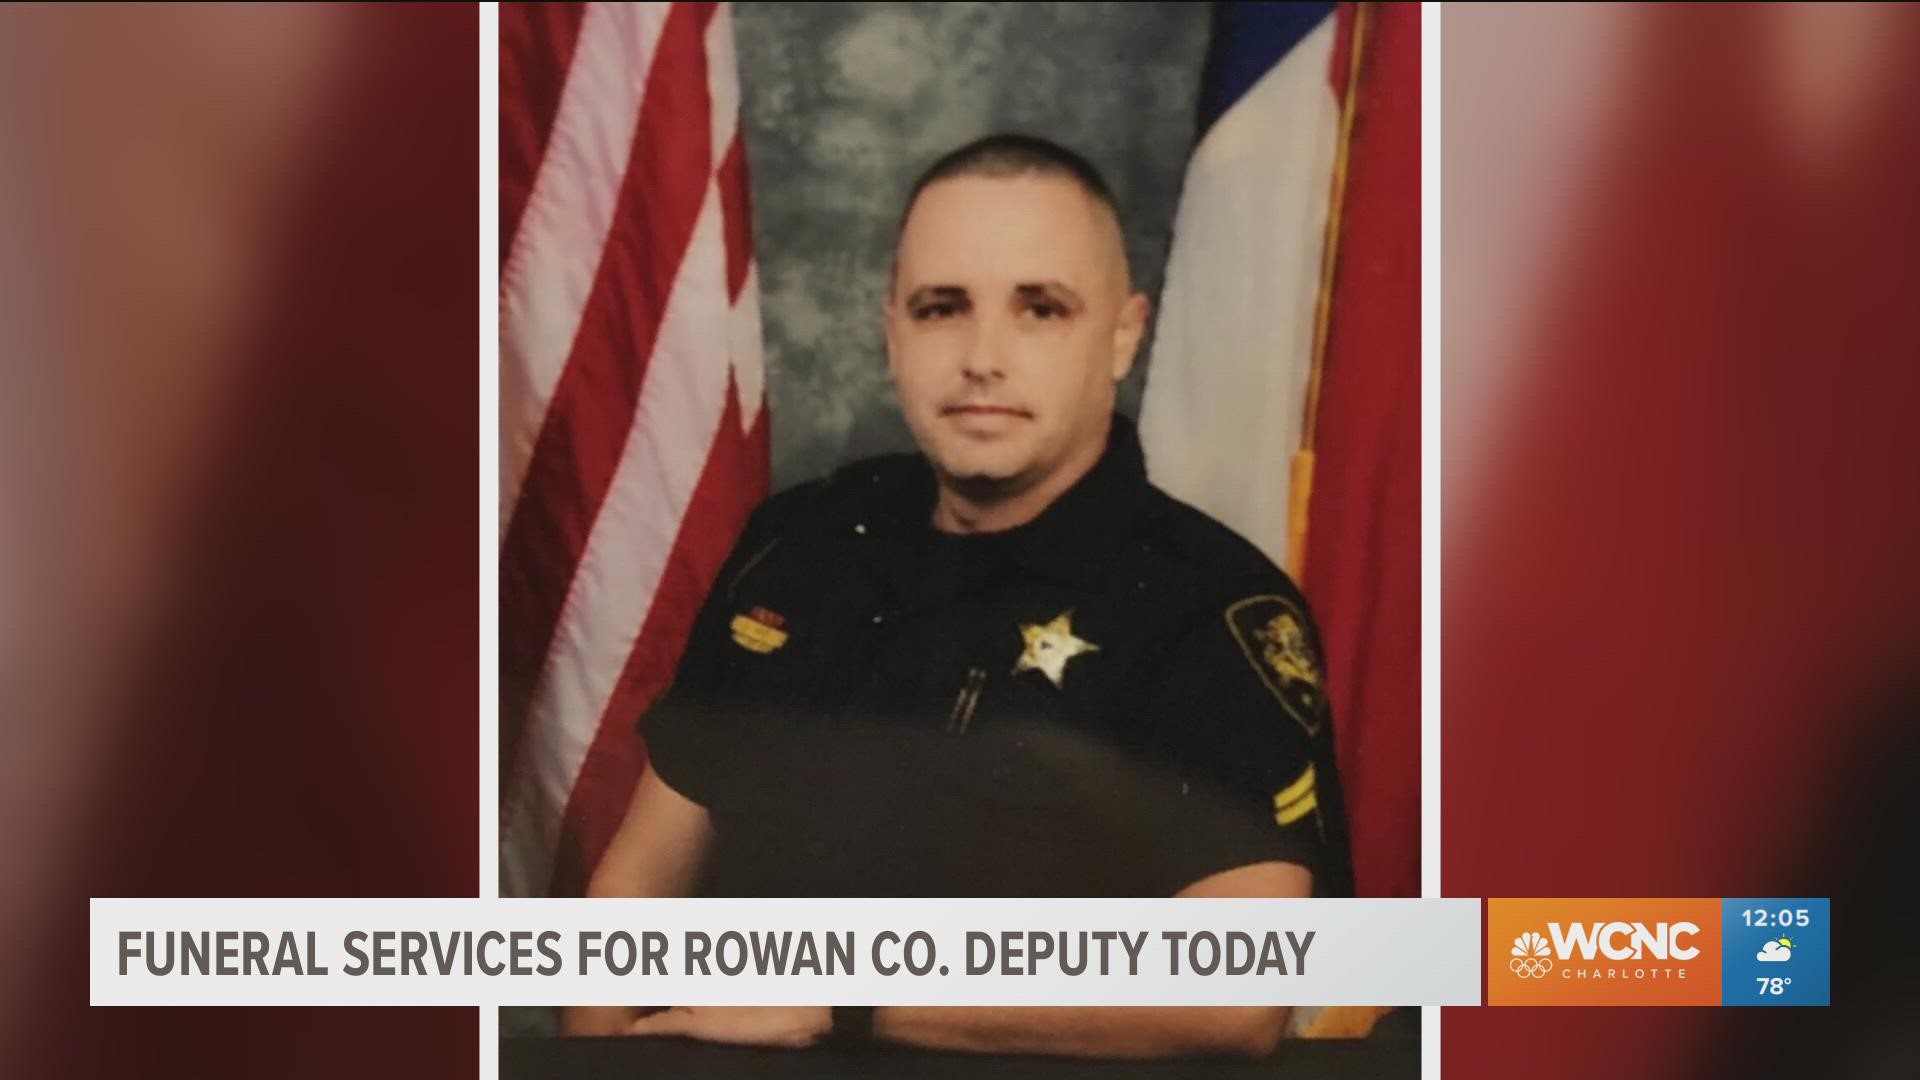 The Rowan County deputy who died from COVID-19 will be laid to rest Thursday afternoon.